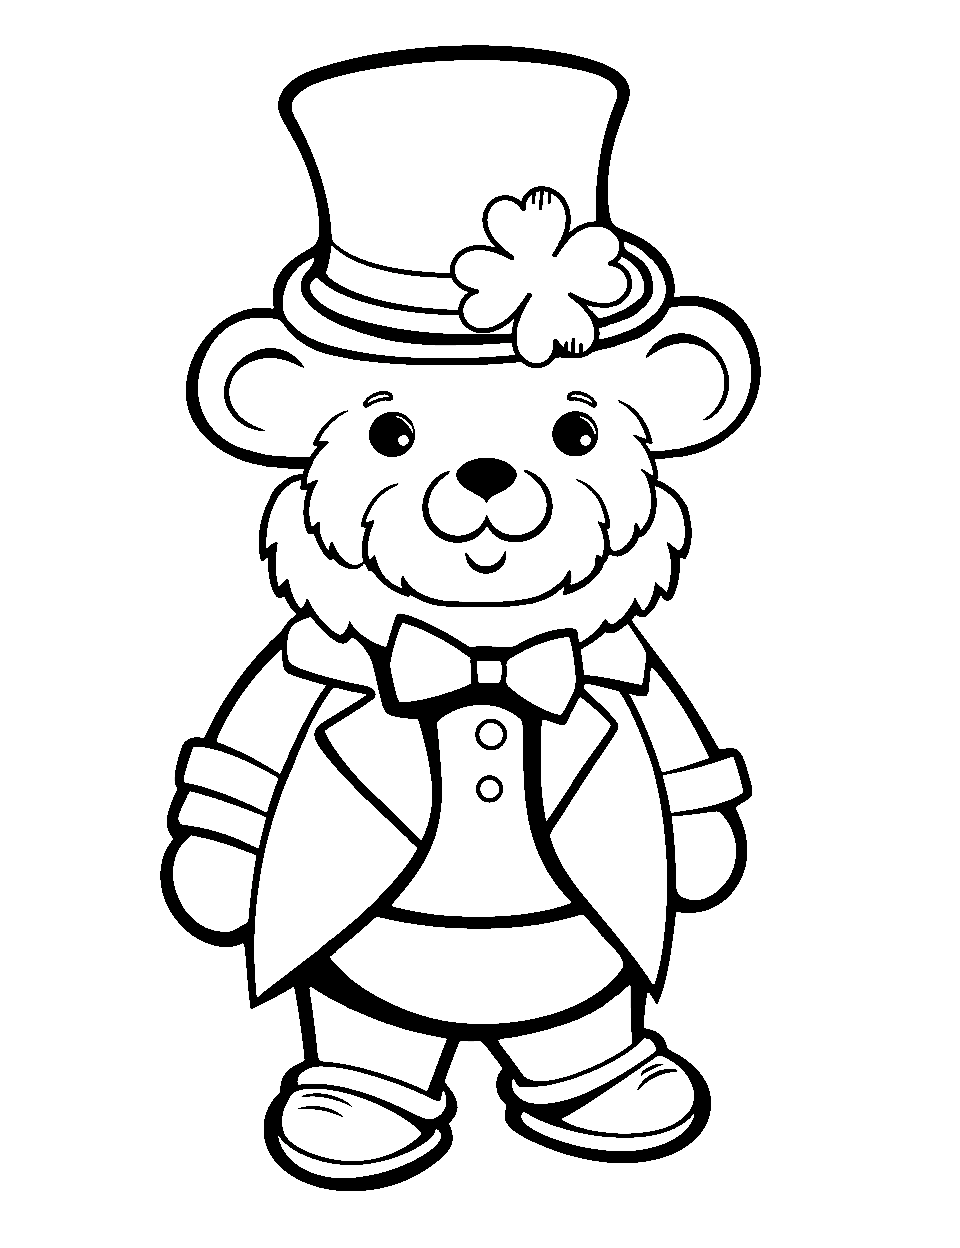 Bear in Leprechaun Outfit Coloring Page - A bear dressed up as a leprechaun, complete with a hat and a beard.